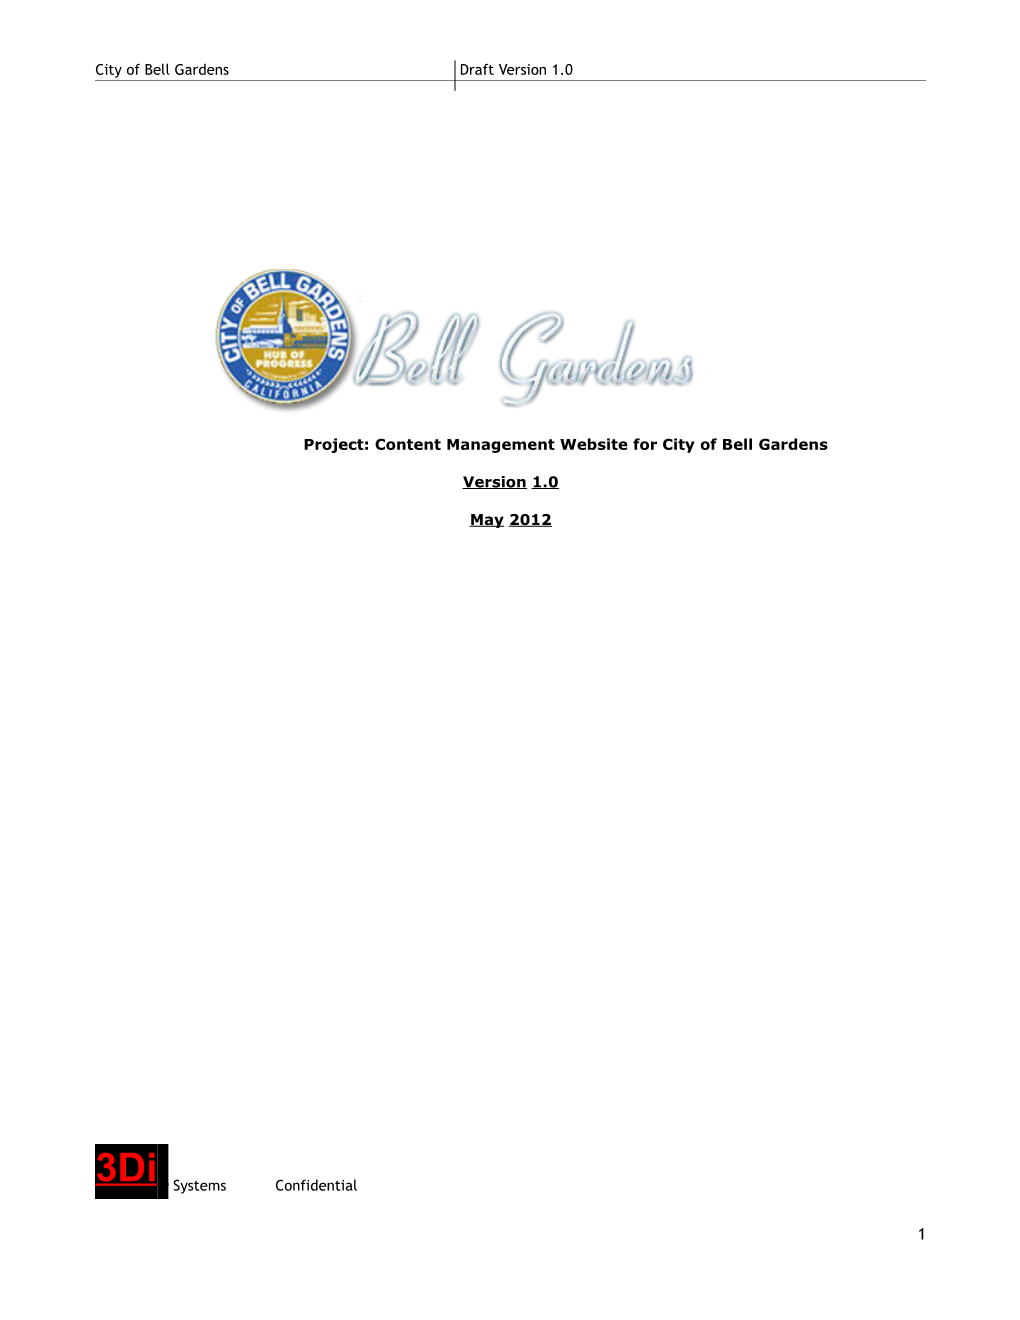 Project:Content Management Website Forcity of Bell Gardens